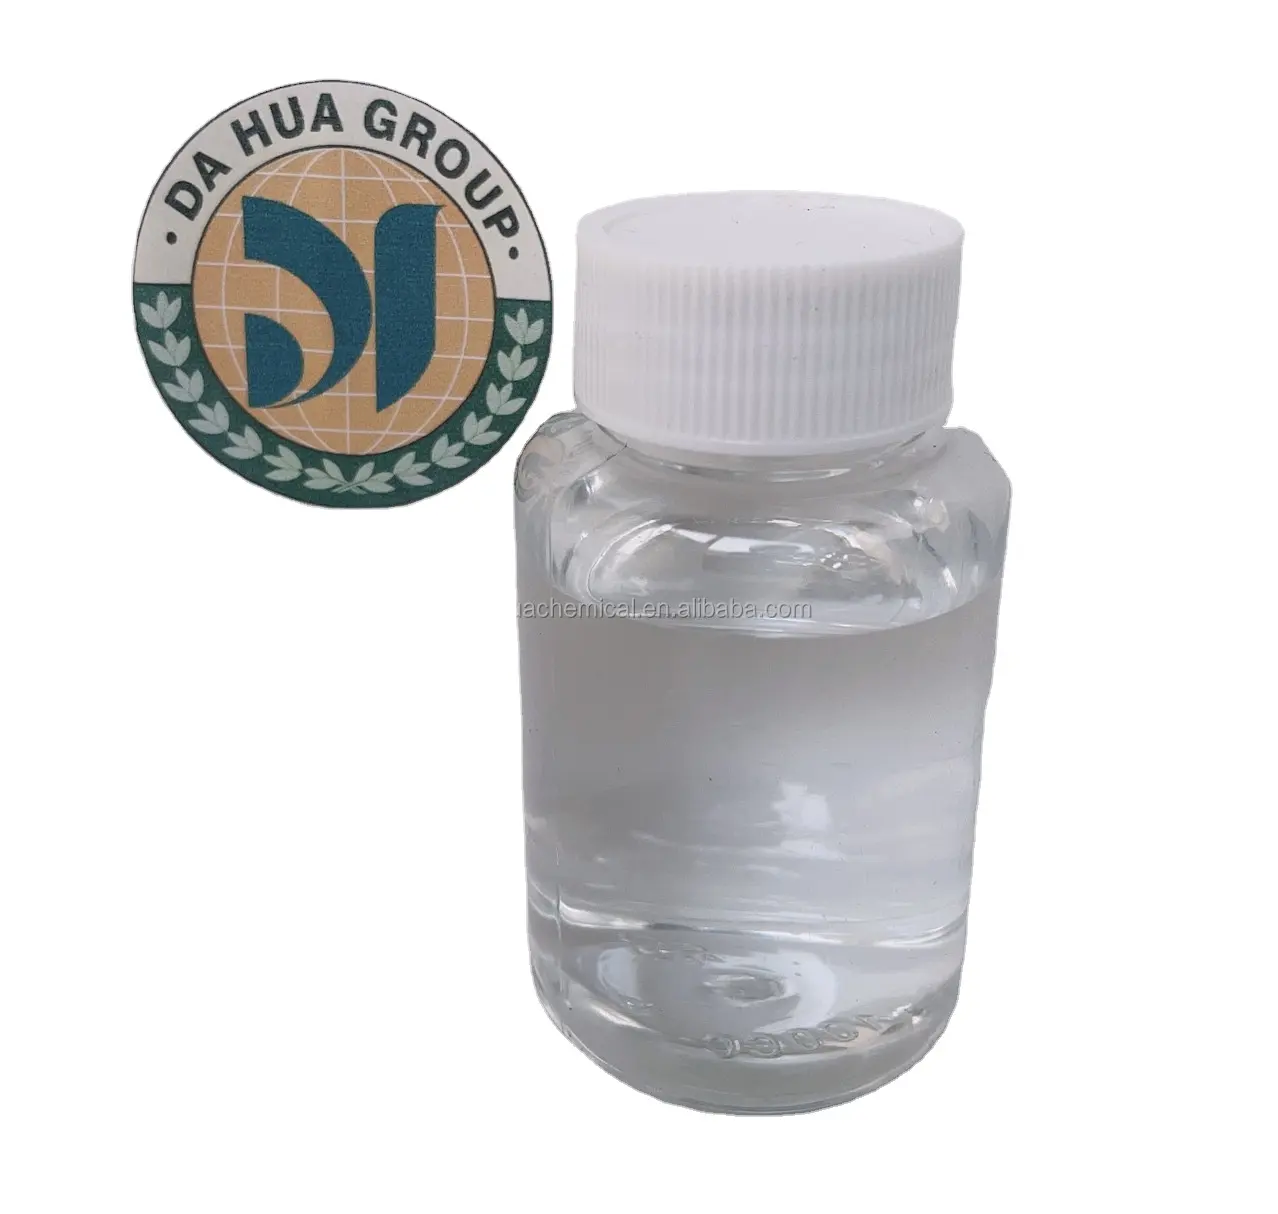 liquid phenylmethyl polysiloxane silicone oil CAS No 63148-58-3 for high temperature dielectric coolant and electric capacitor